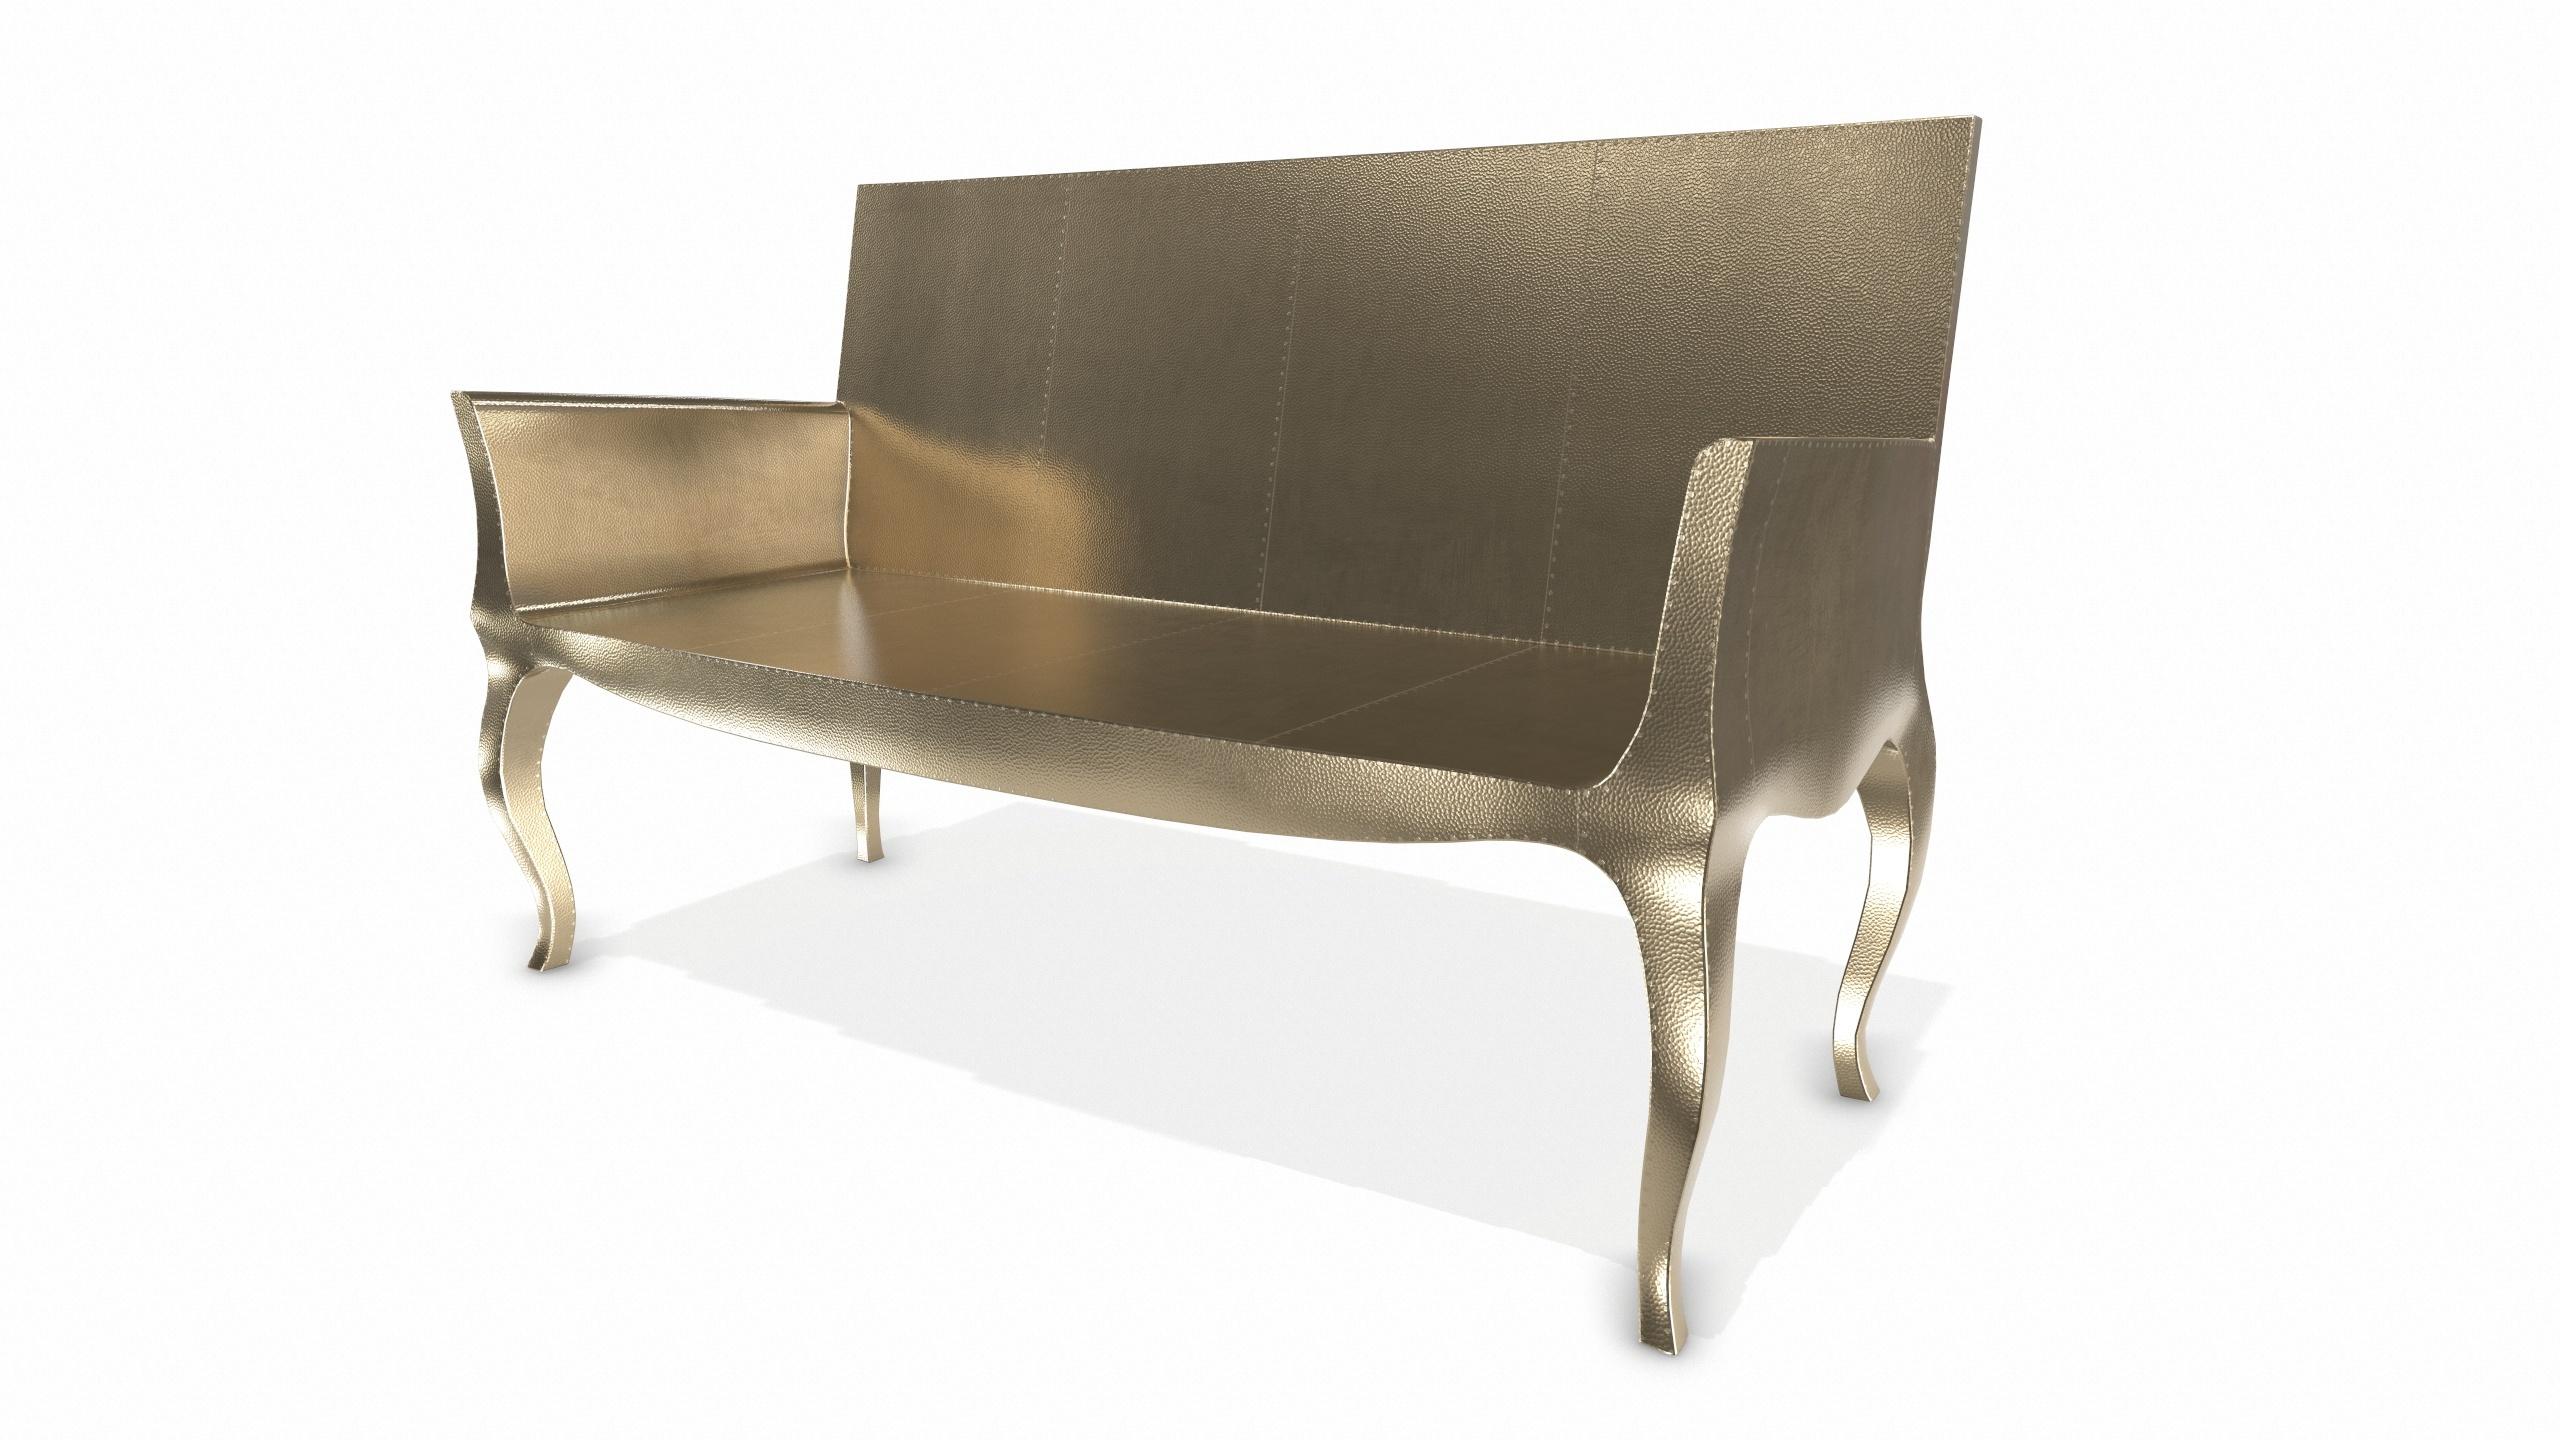 American Louise Settee Art Deco Loveseats in Mid. Hammered Brass by Paul Mathieu For Sale